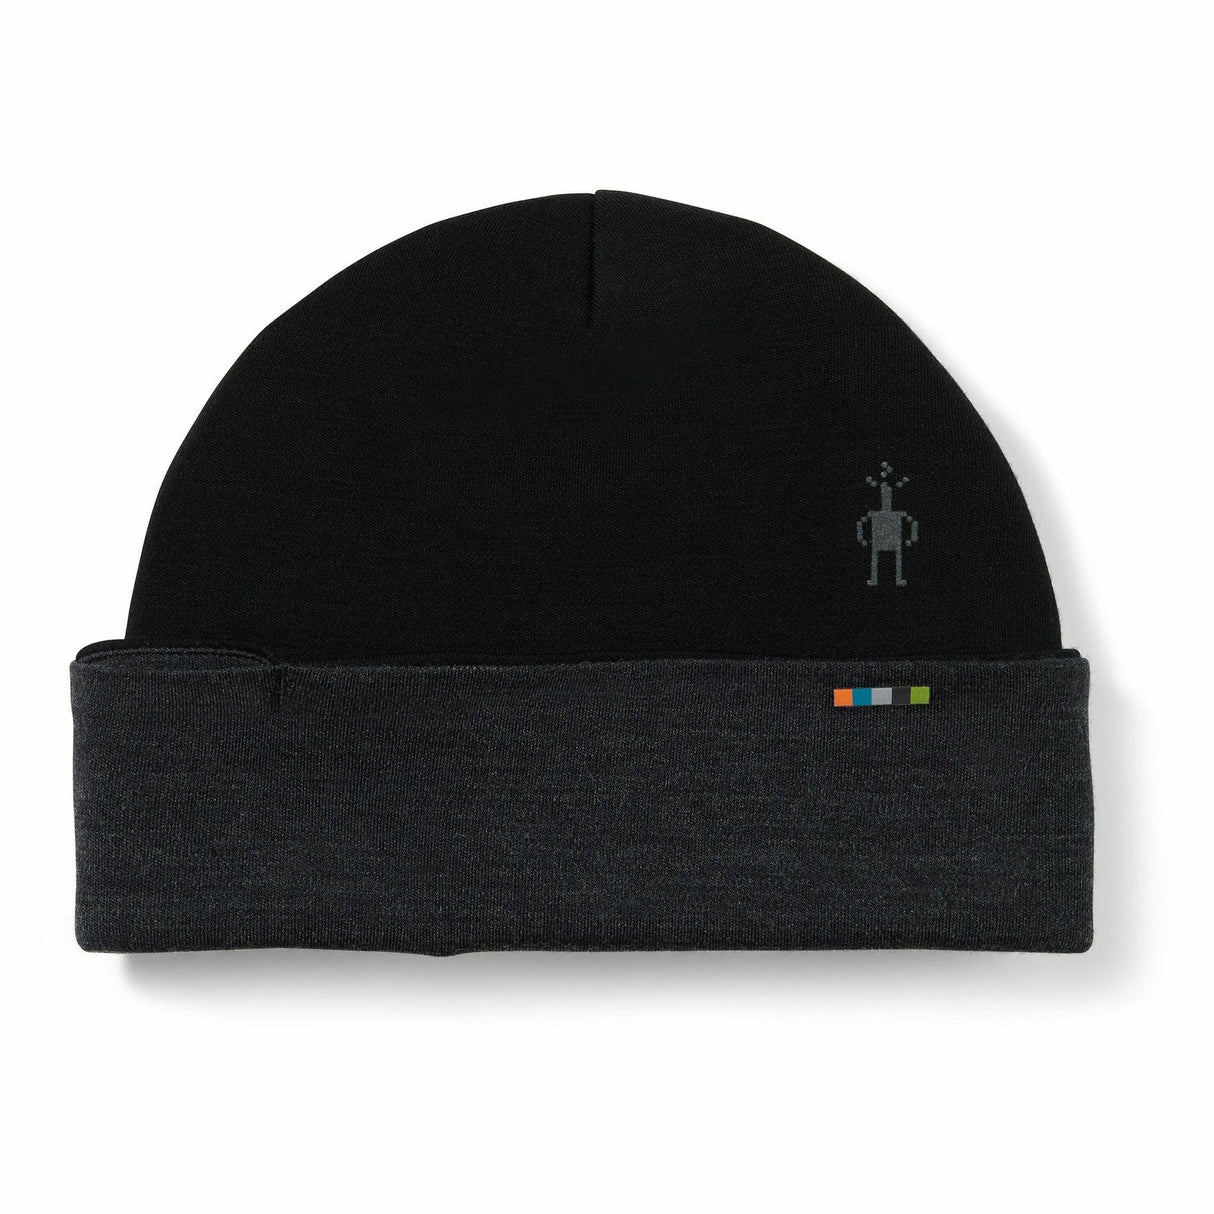 Smartwool Thermal Merino Stowe Pocket Beanie  -  One Size Fits Most / Black